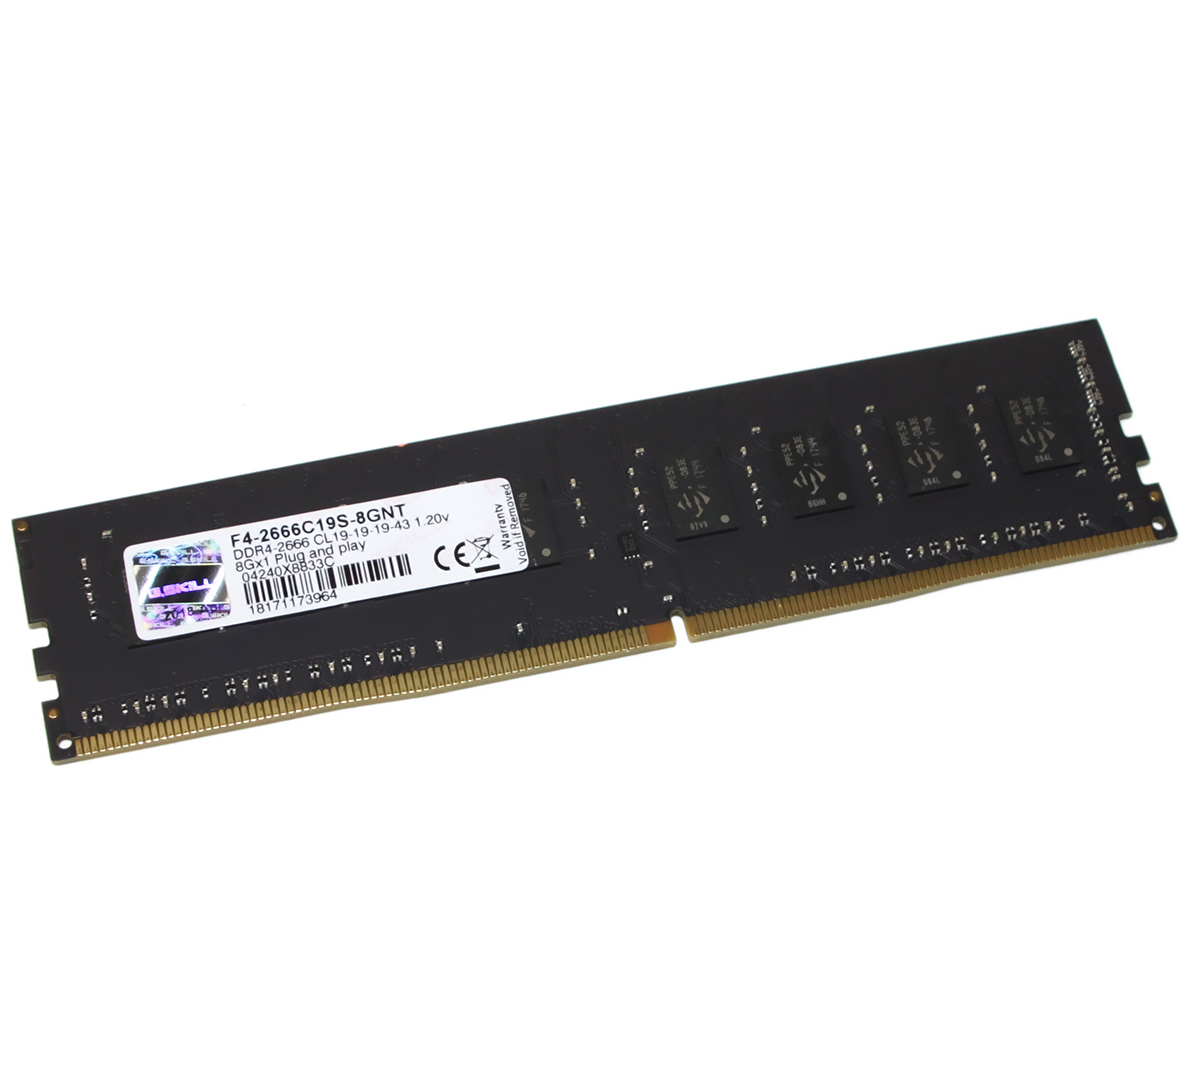 G.SKILL NT Value F4-2666C19S-8GNT 8GB DDR4 2666MHz CL19